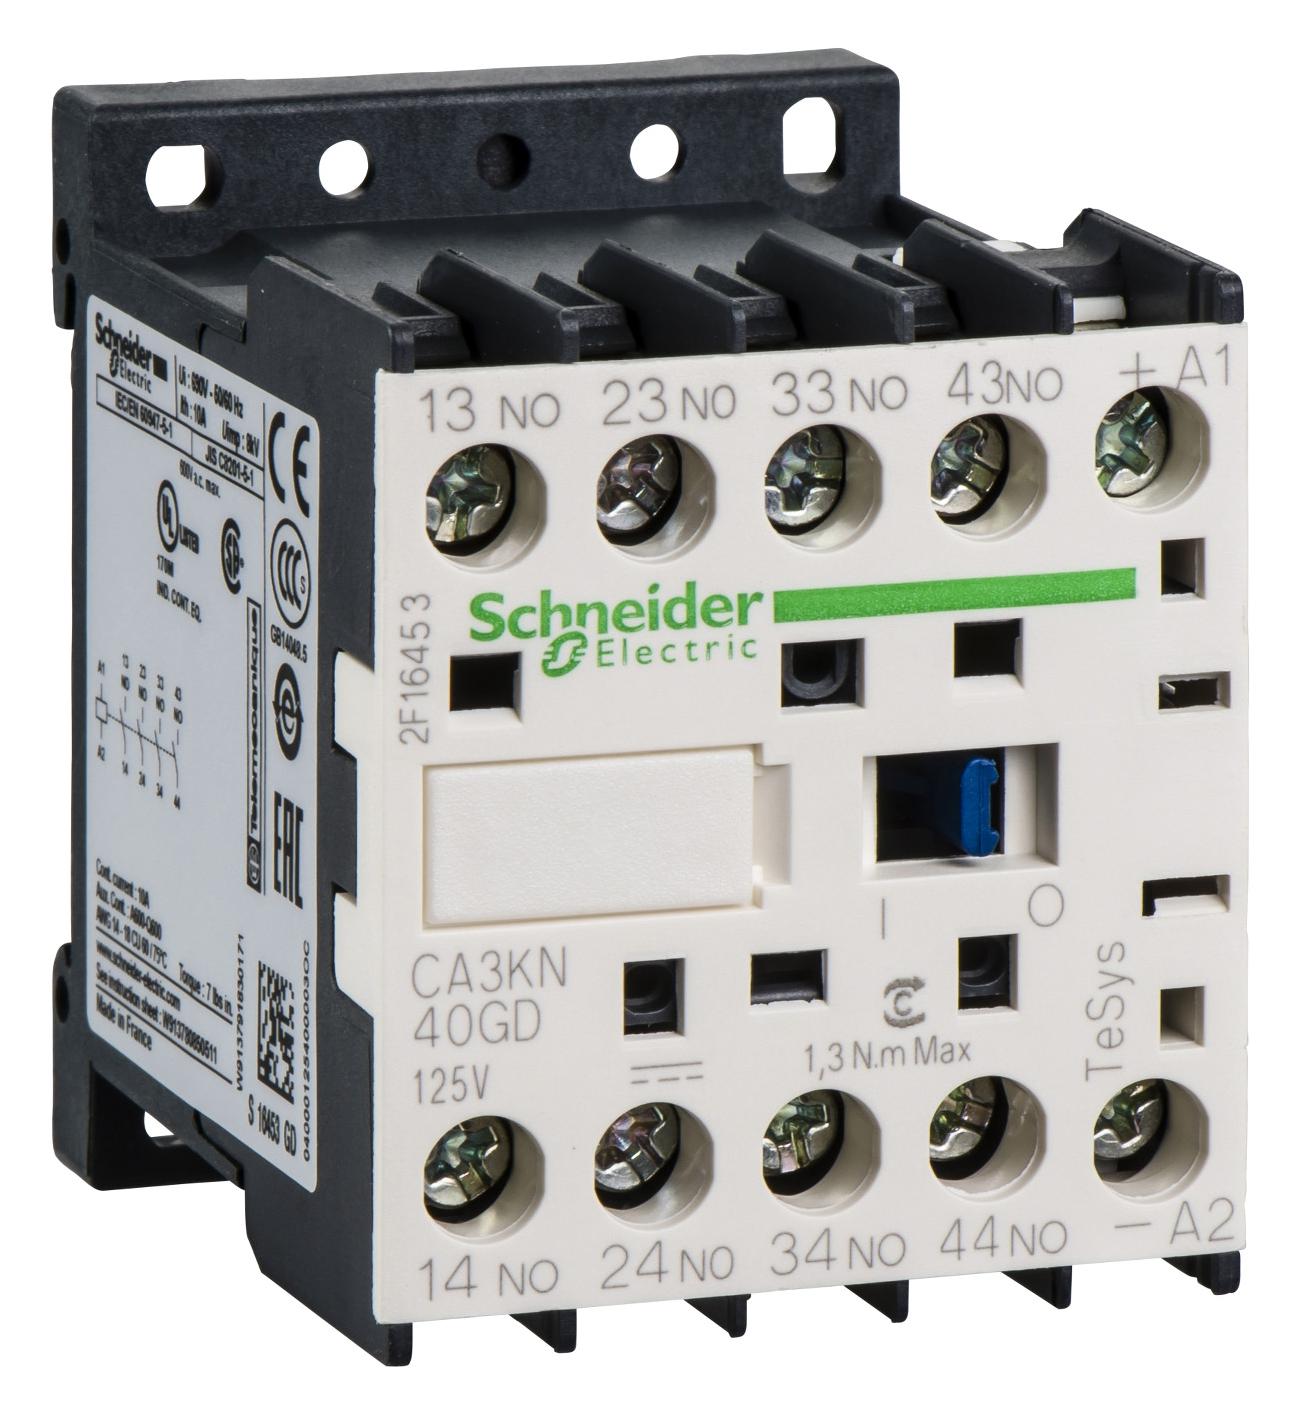 CA3KN40GD CONTROL RELAY 4NO CONTACTS SCHNEIDER ELECTRIC